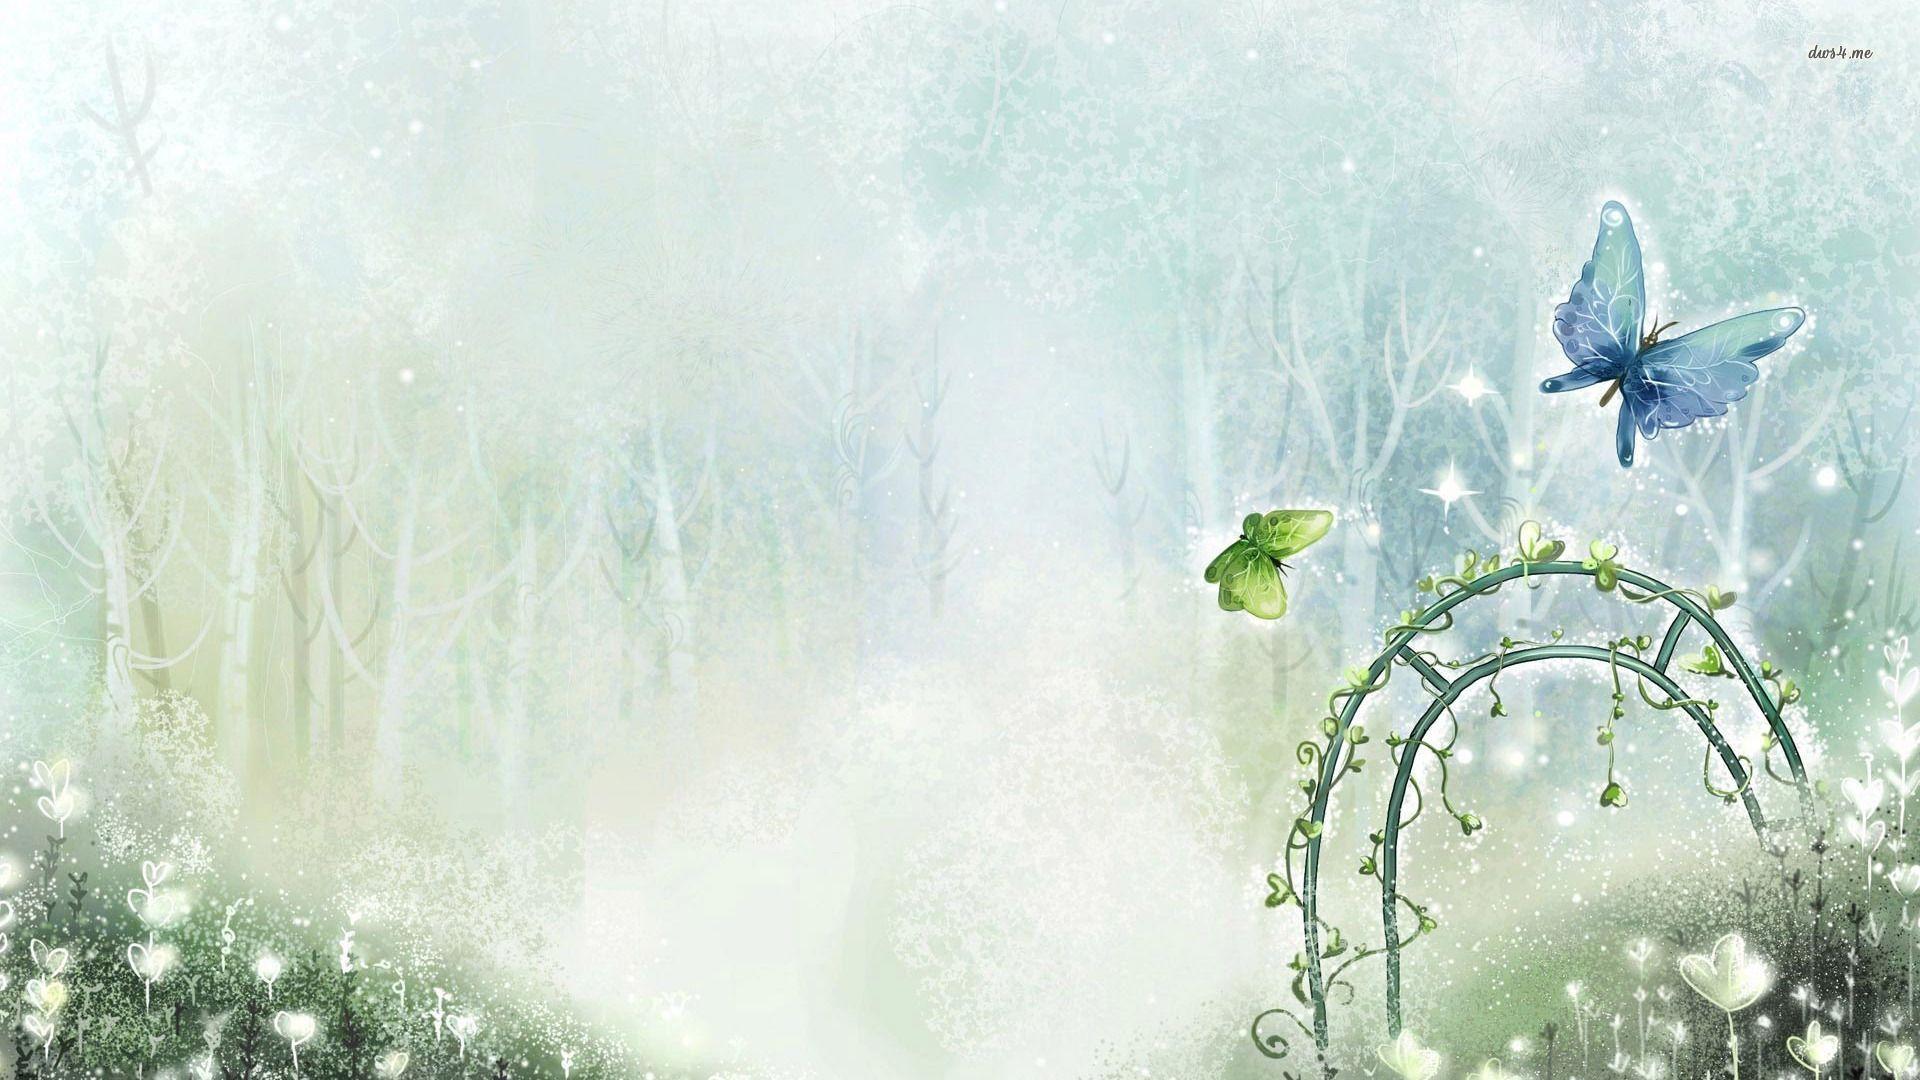 50 Wallpaper Enchanted forest DOWNLOAD FREE 14030